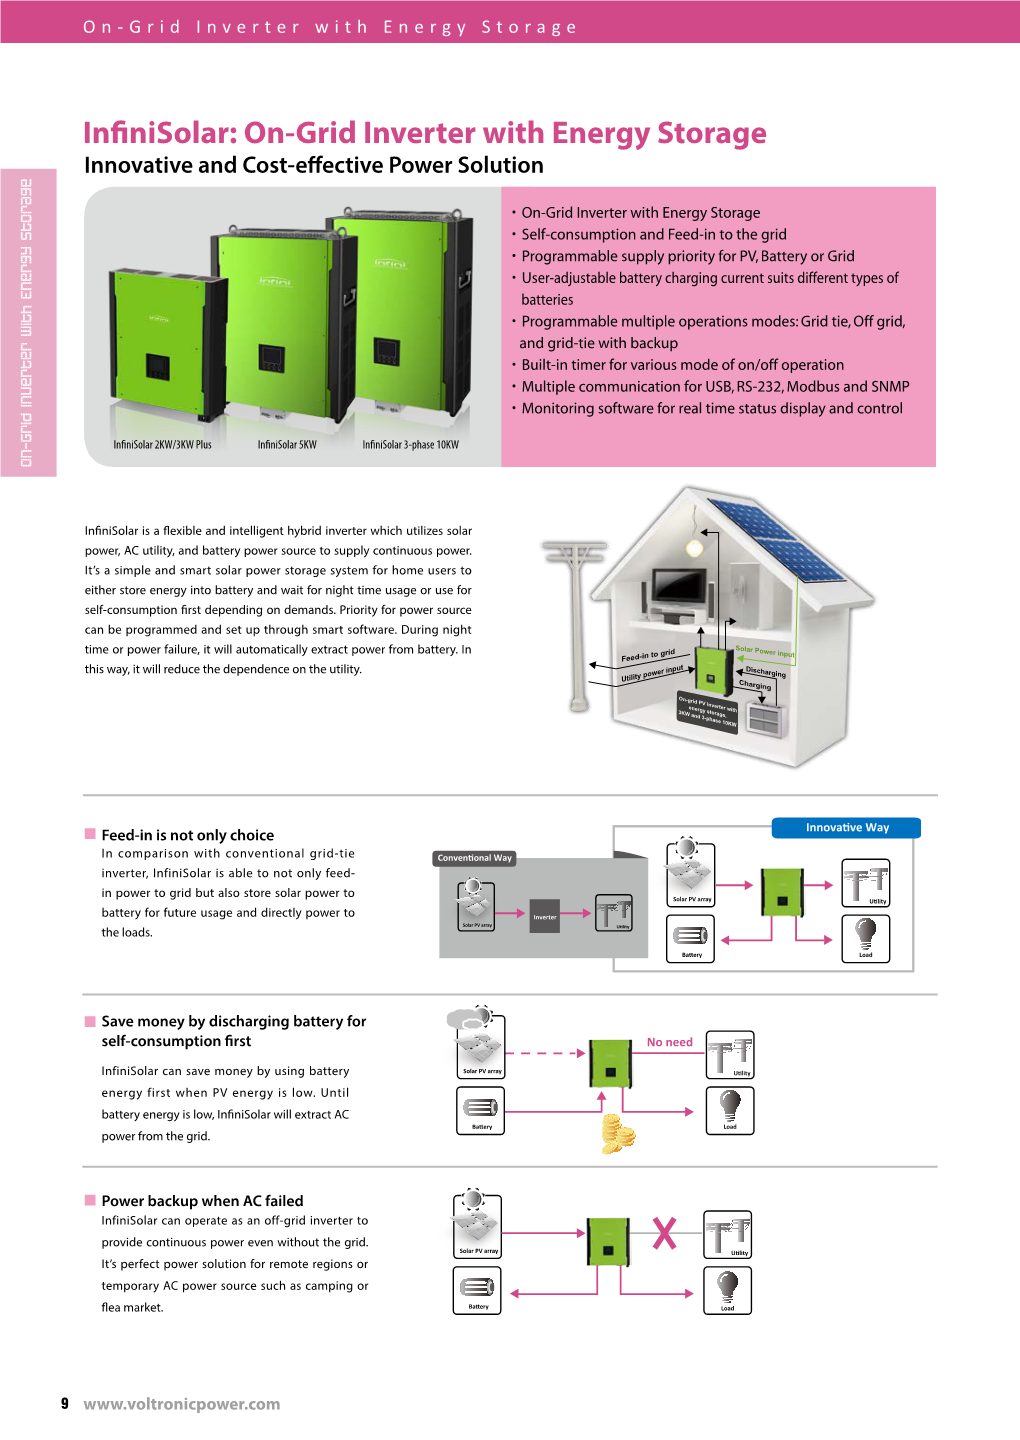 Infinisolar: On-Grid Inverter with Energy Storage Innovative and Cost-Effective Power Solution